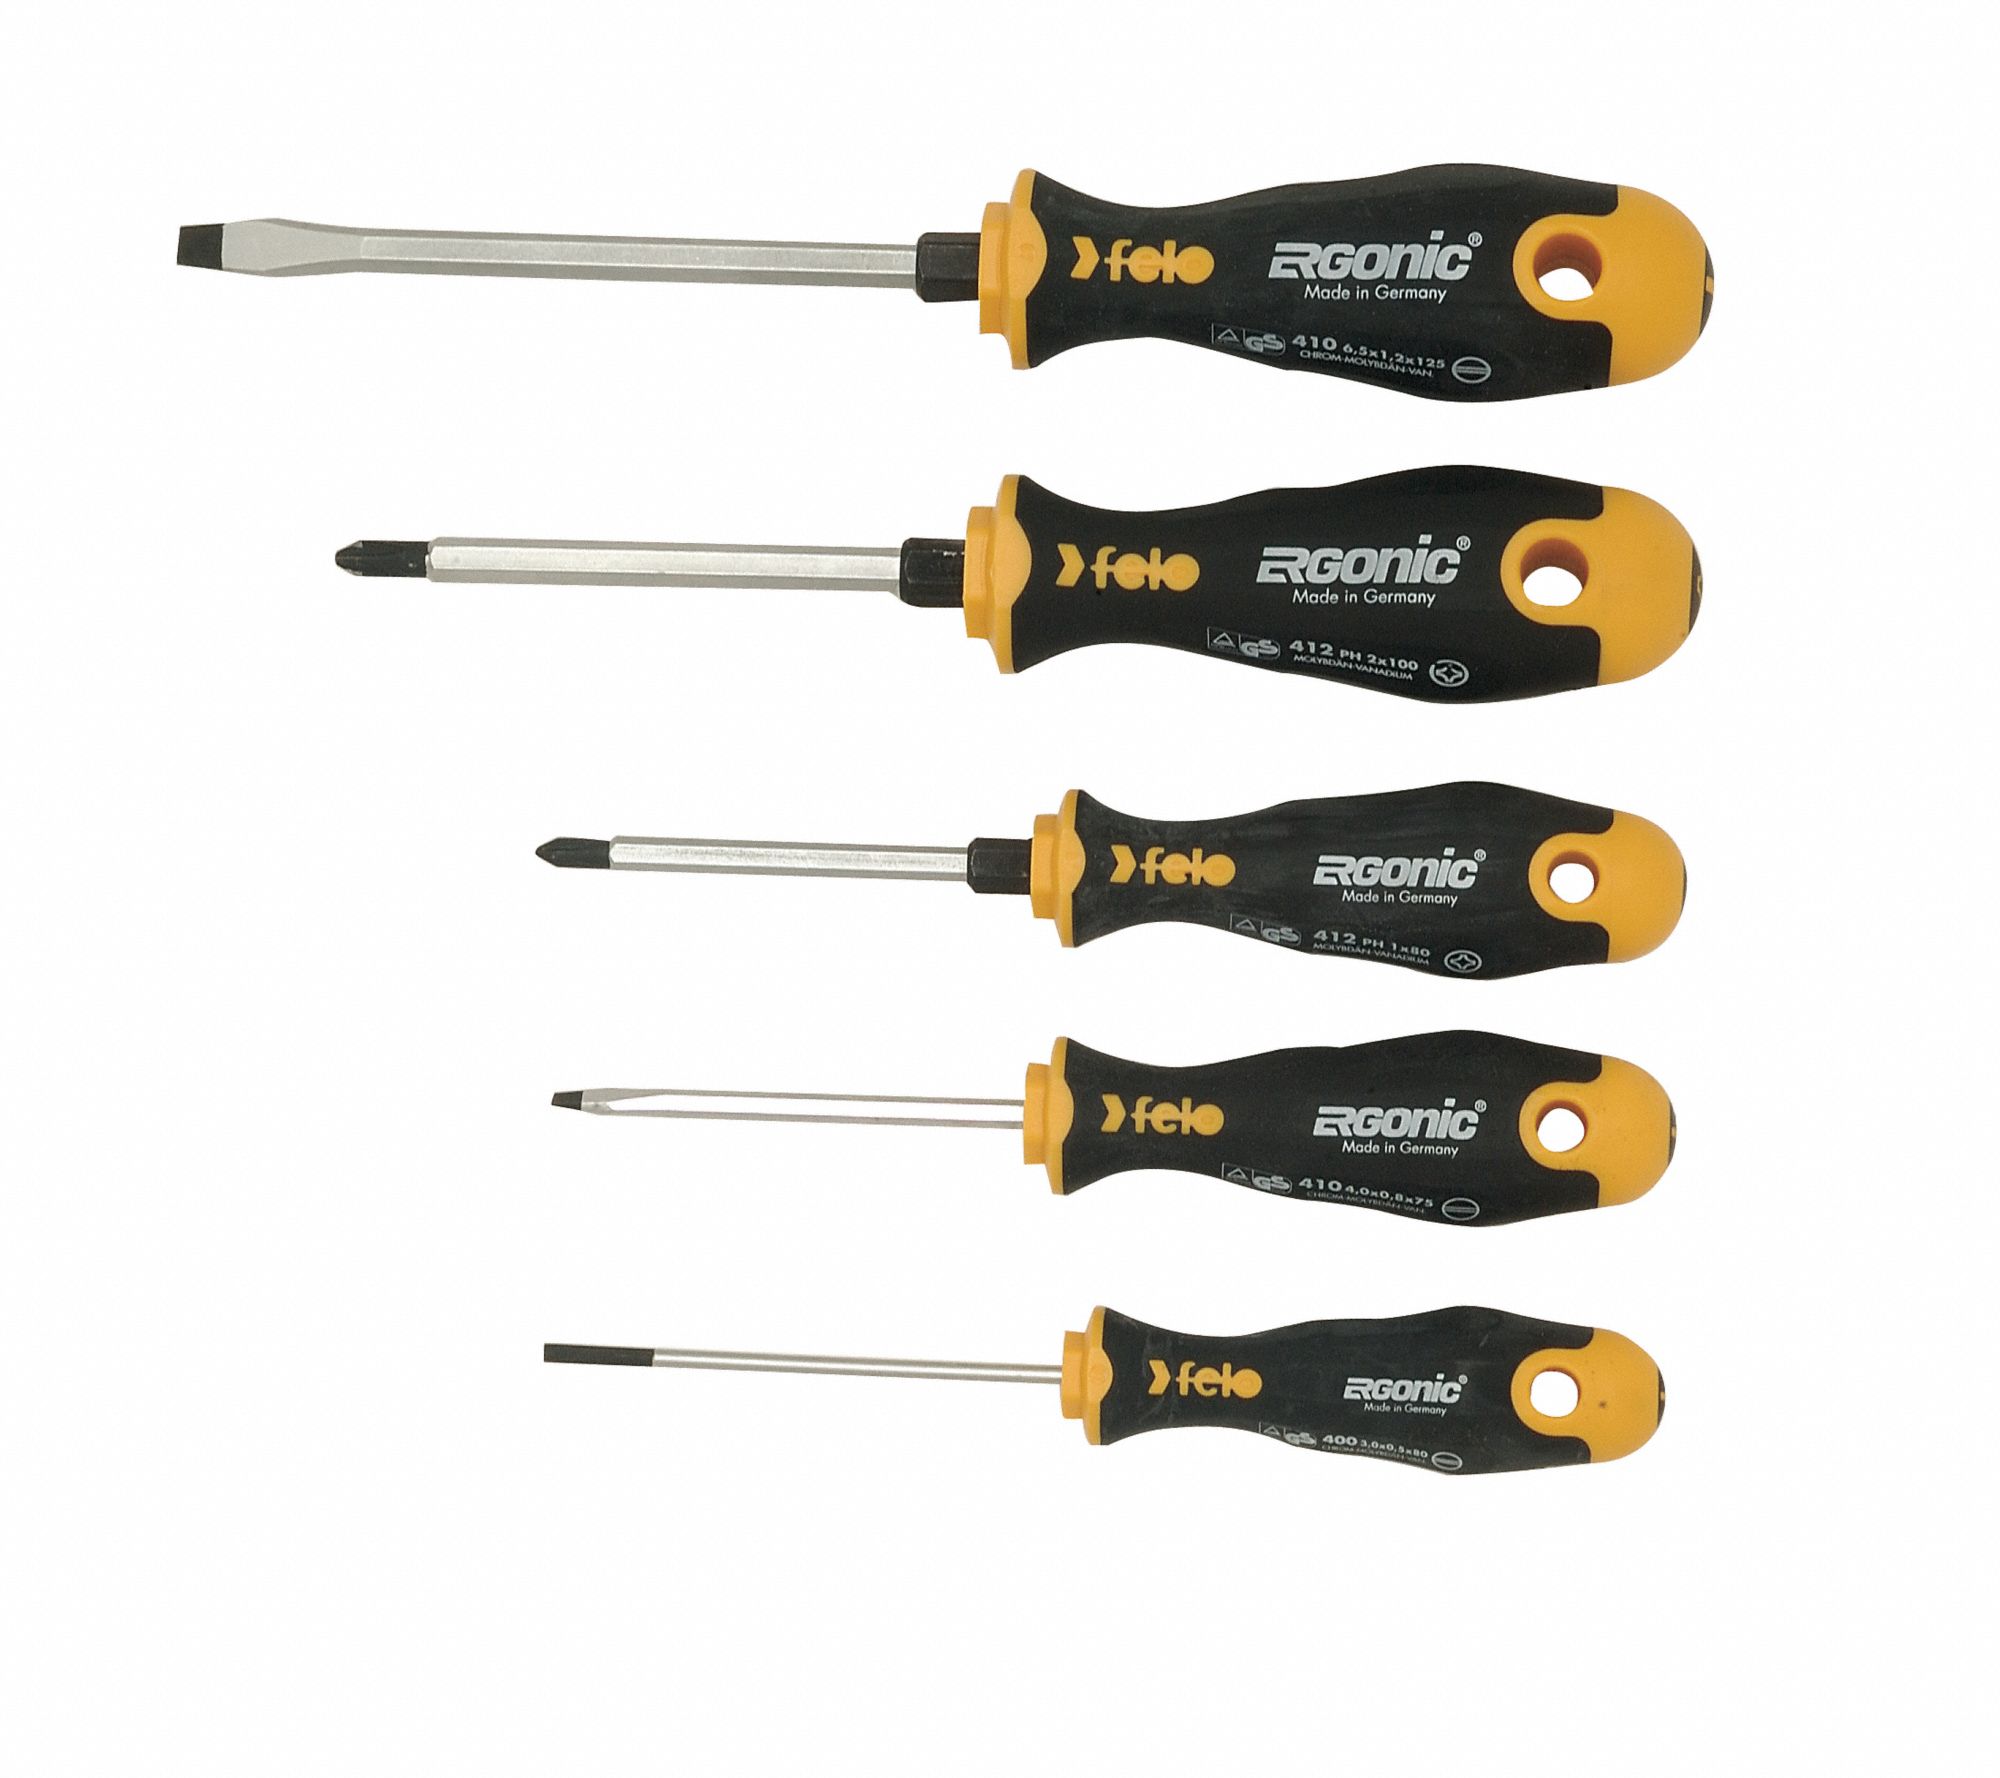 Assorted Combination Screwdriver Set Multicomponent, Number of Pieces: 6